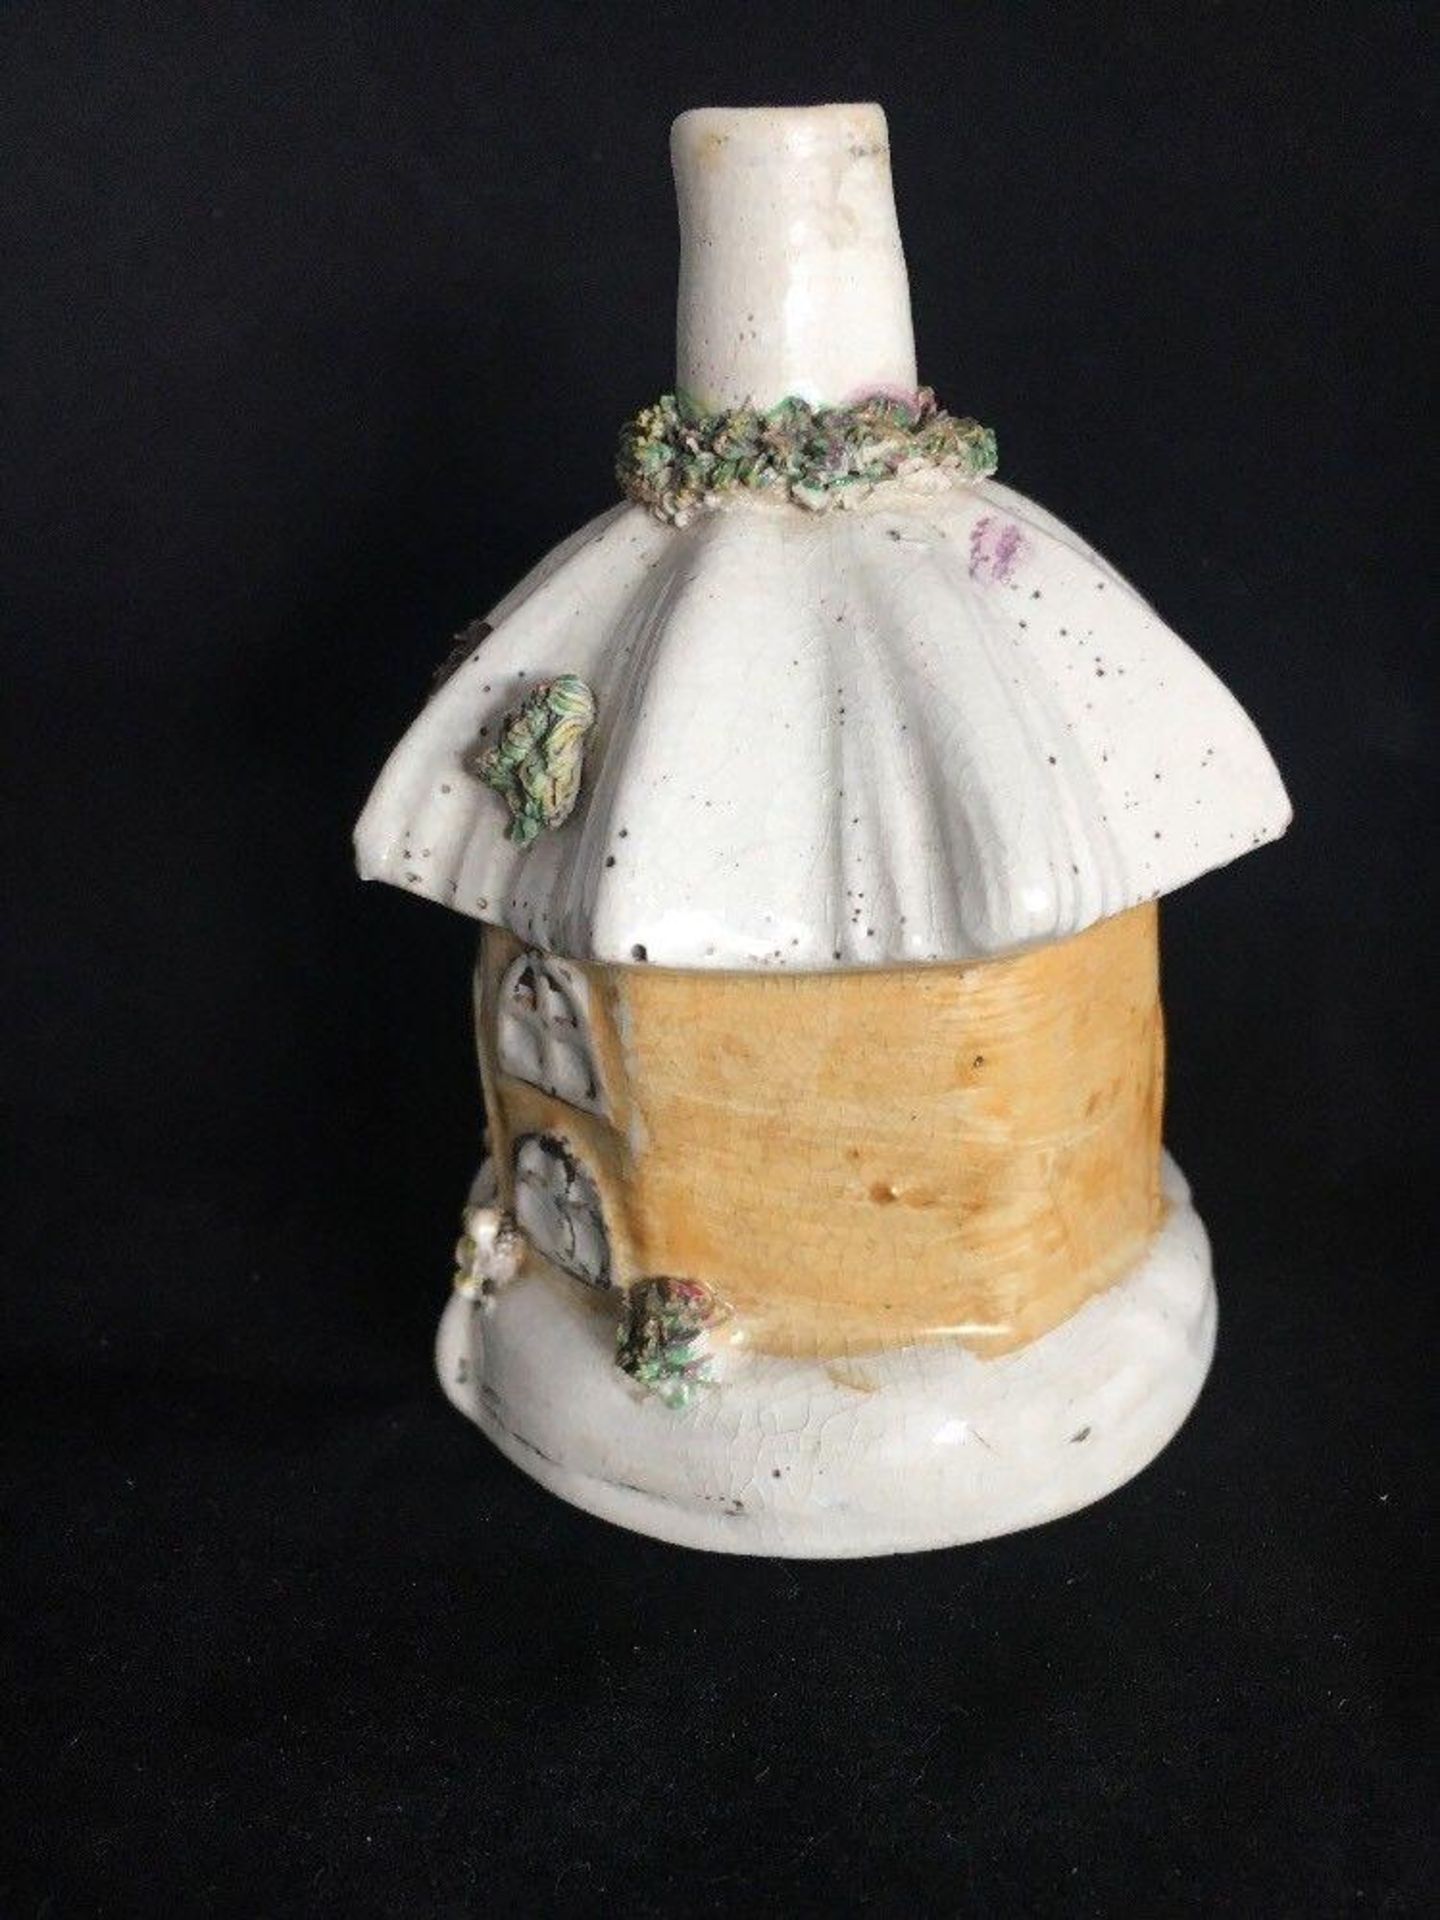 Staffordshire Pottery Octagonal House Pastille Burner Night Light in the form of a Thatched Cottage - Image 2 of 5